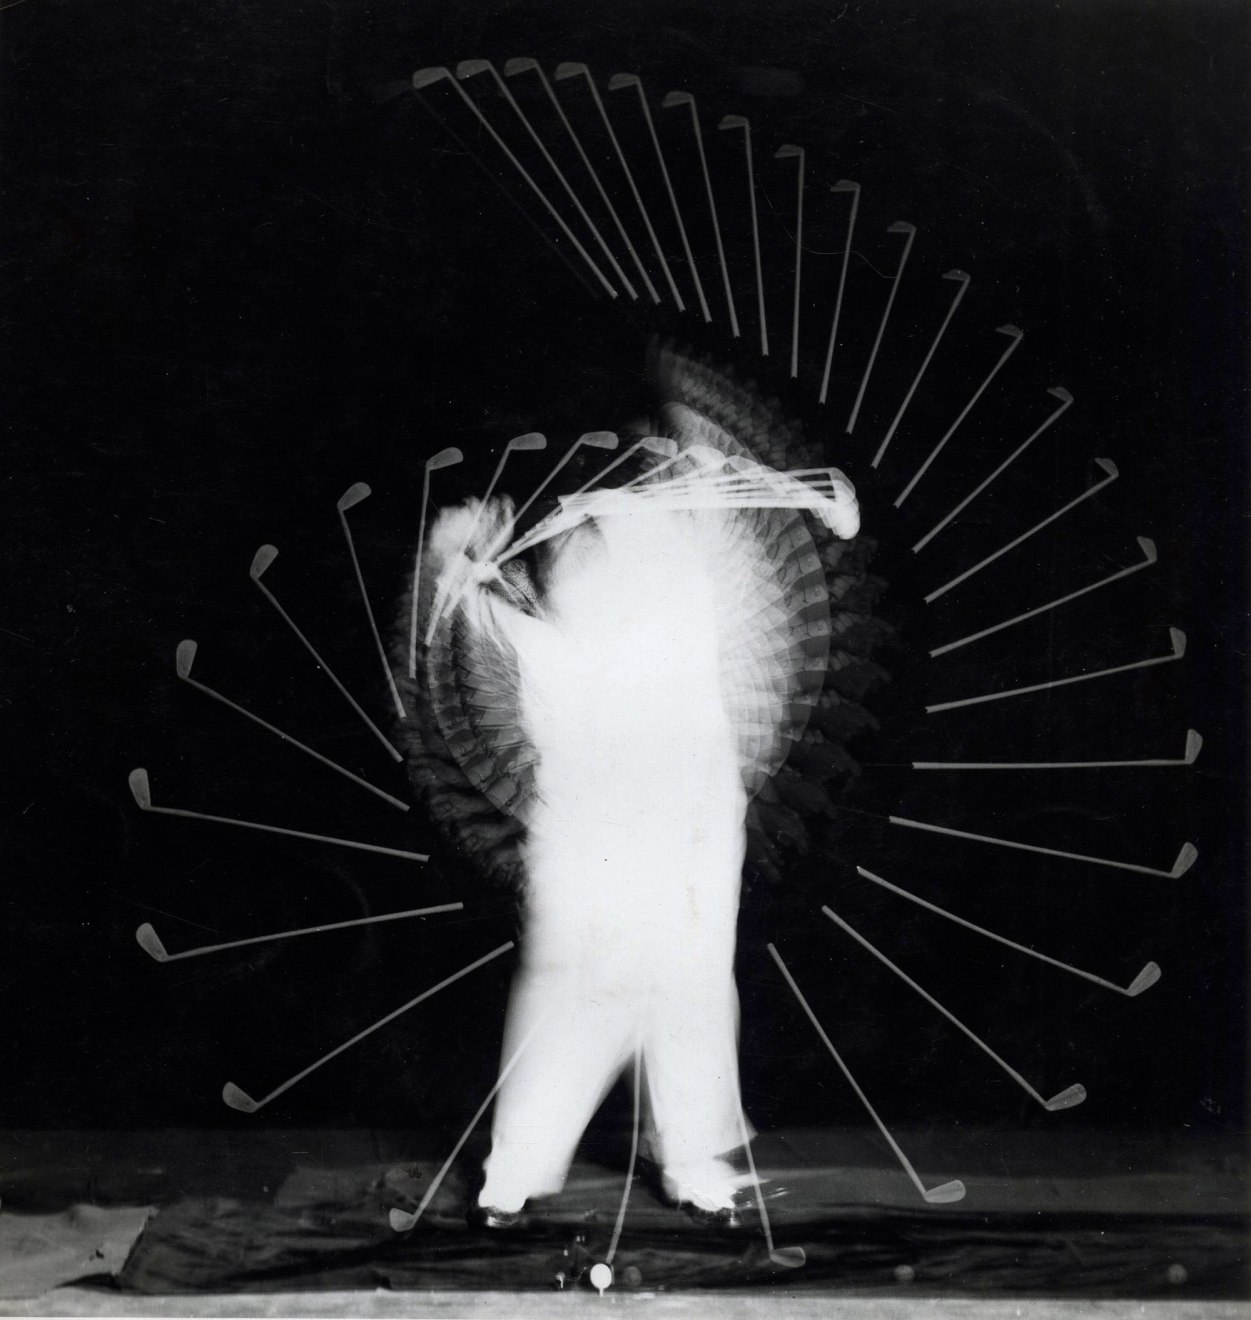 Harold Edgerton, Golf Swing (100 pictures a second)